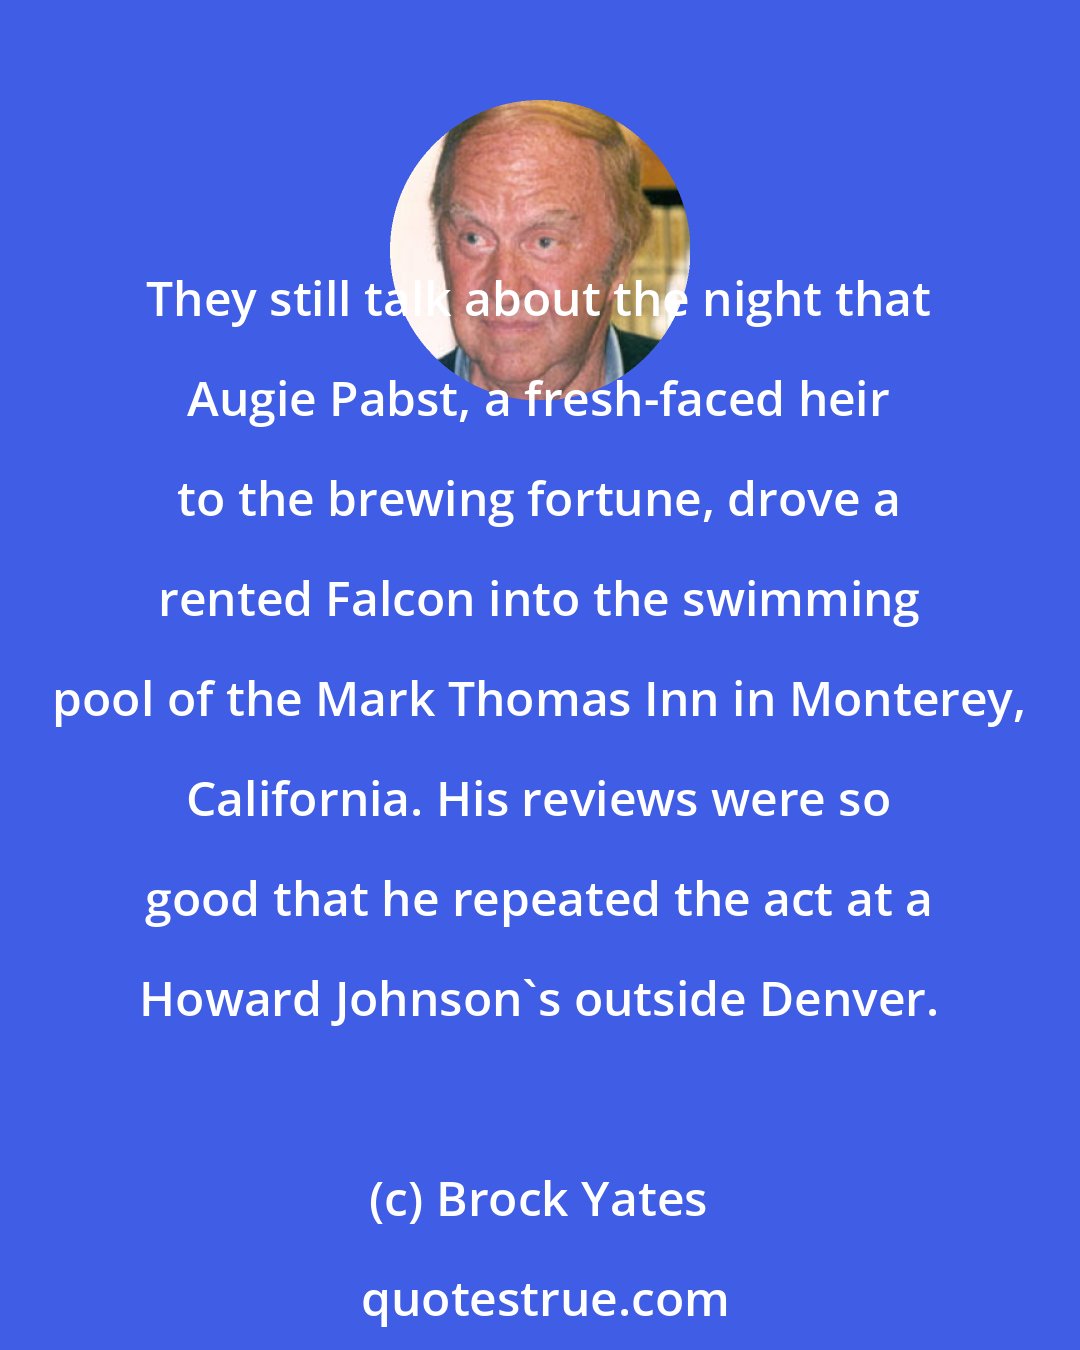 Brock Yates: They still talk about the night that Augie Pabst, a fresh-faced heir to the brewing fortune, drove a rented Falcon into the swimming pool of the Mark Thomas Inn in Monterey, California. His reviews were so good that he repeated the act at a Howard Johnson's outside Denver.